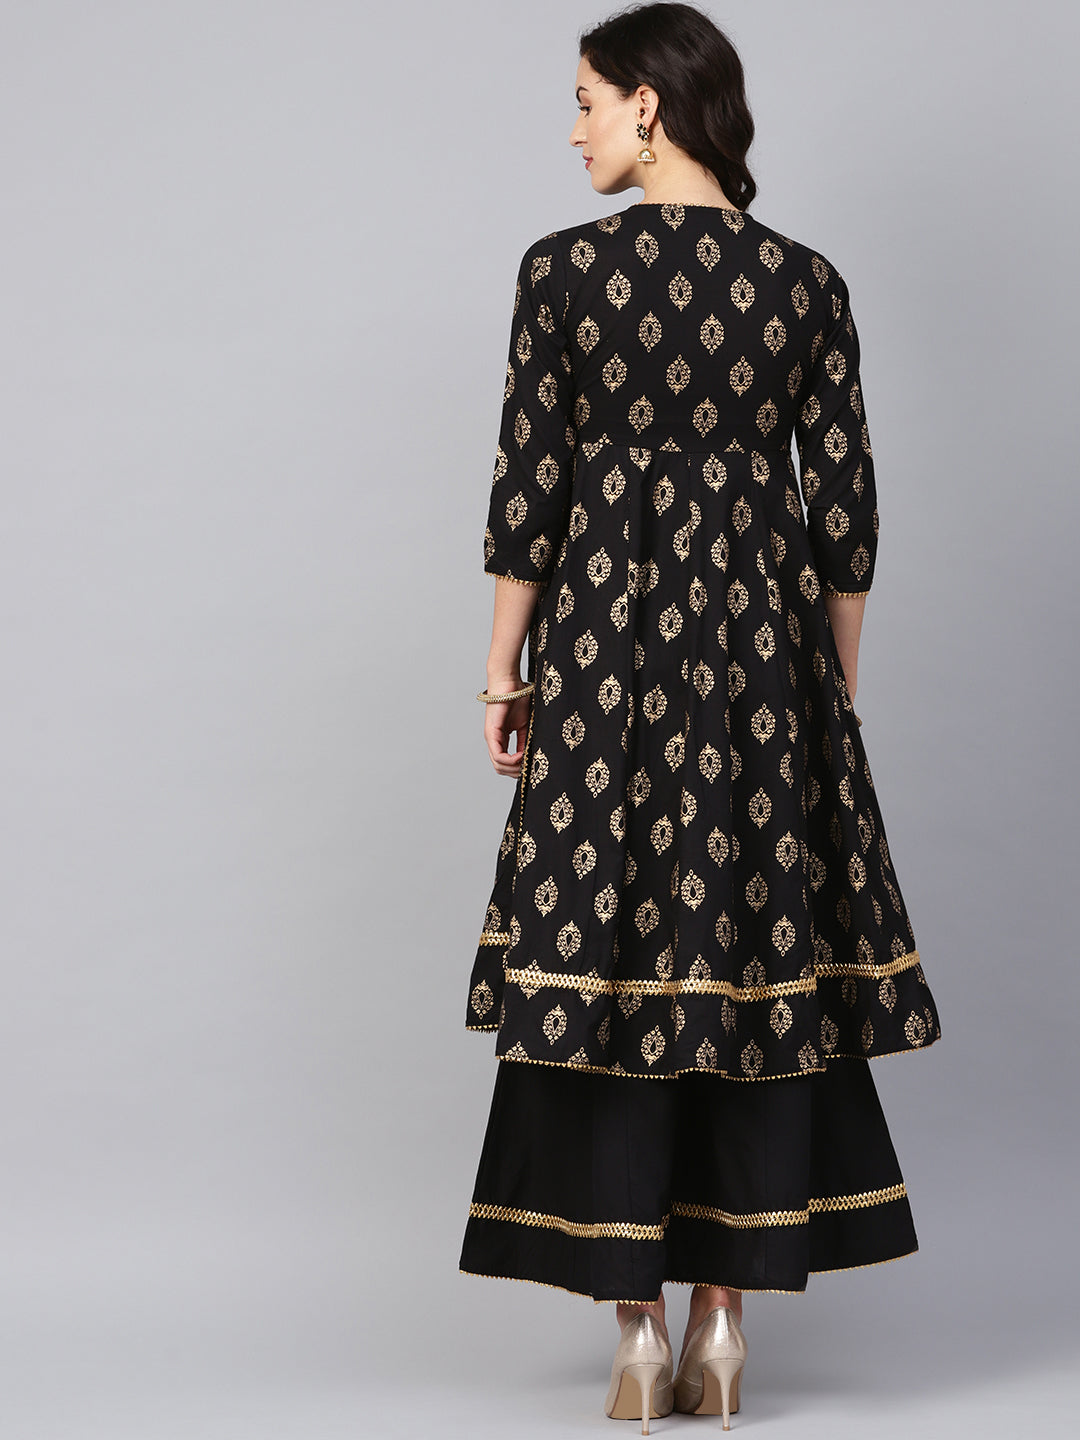 Women's Black And Golden Printed Kurta With Palazzos - Bhama Couture